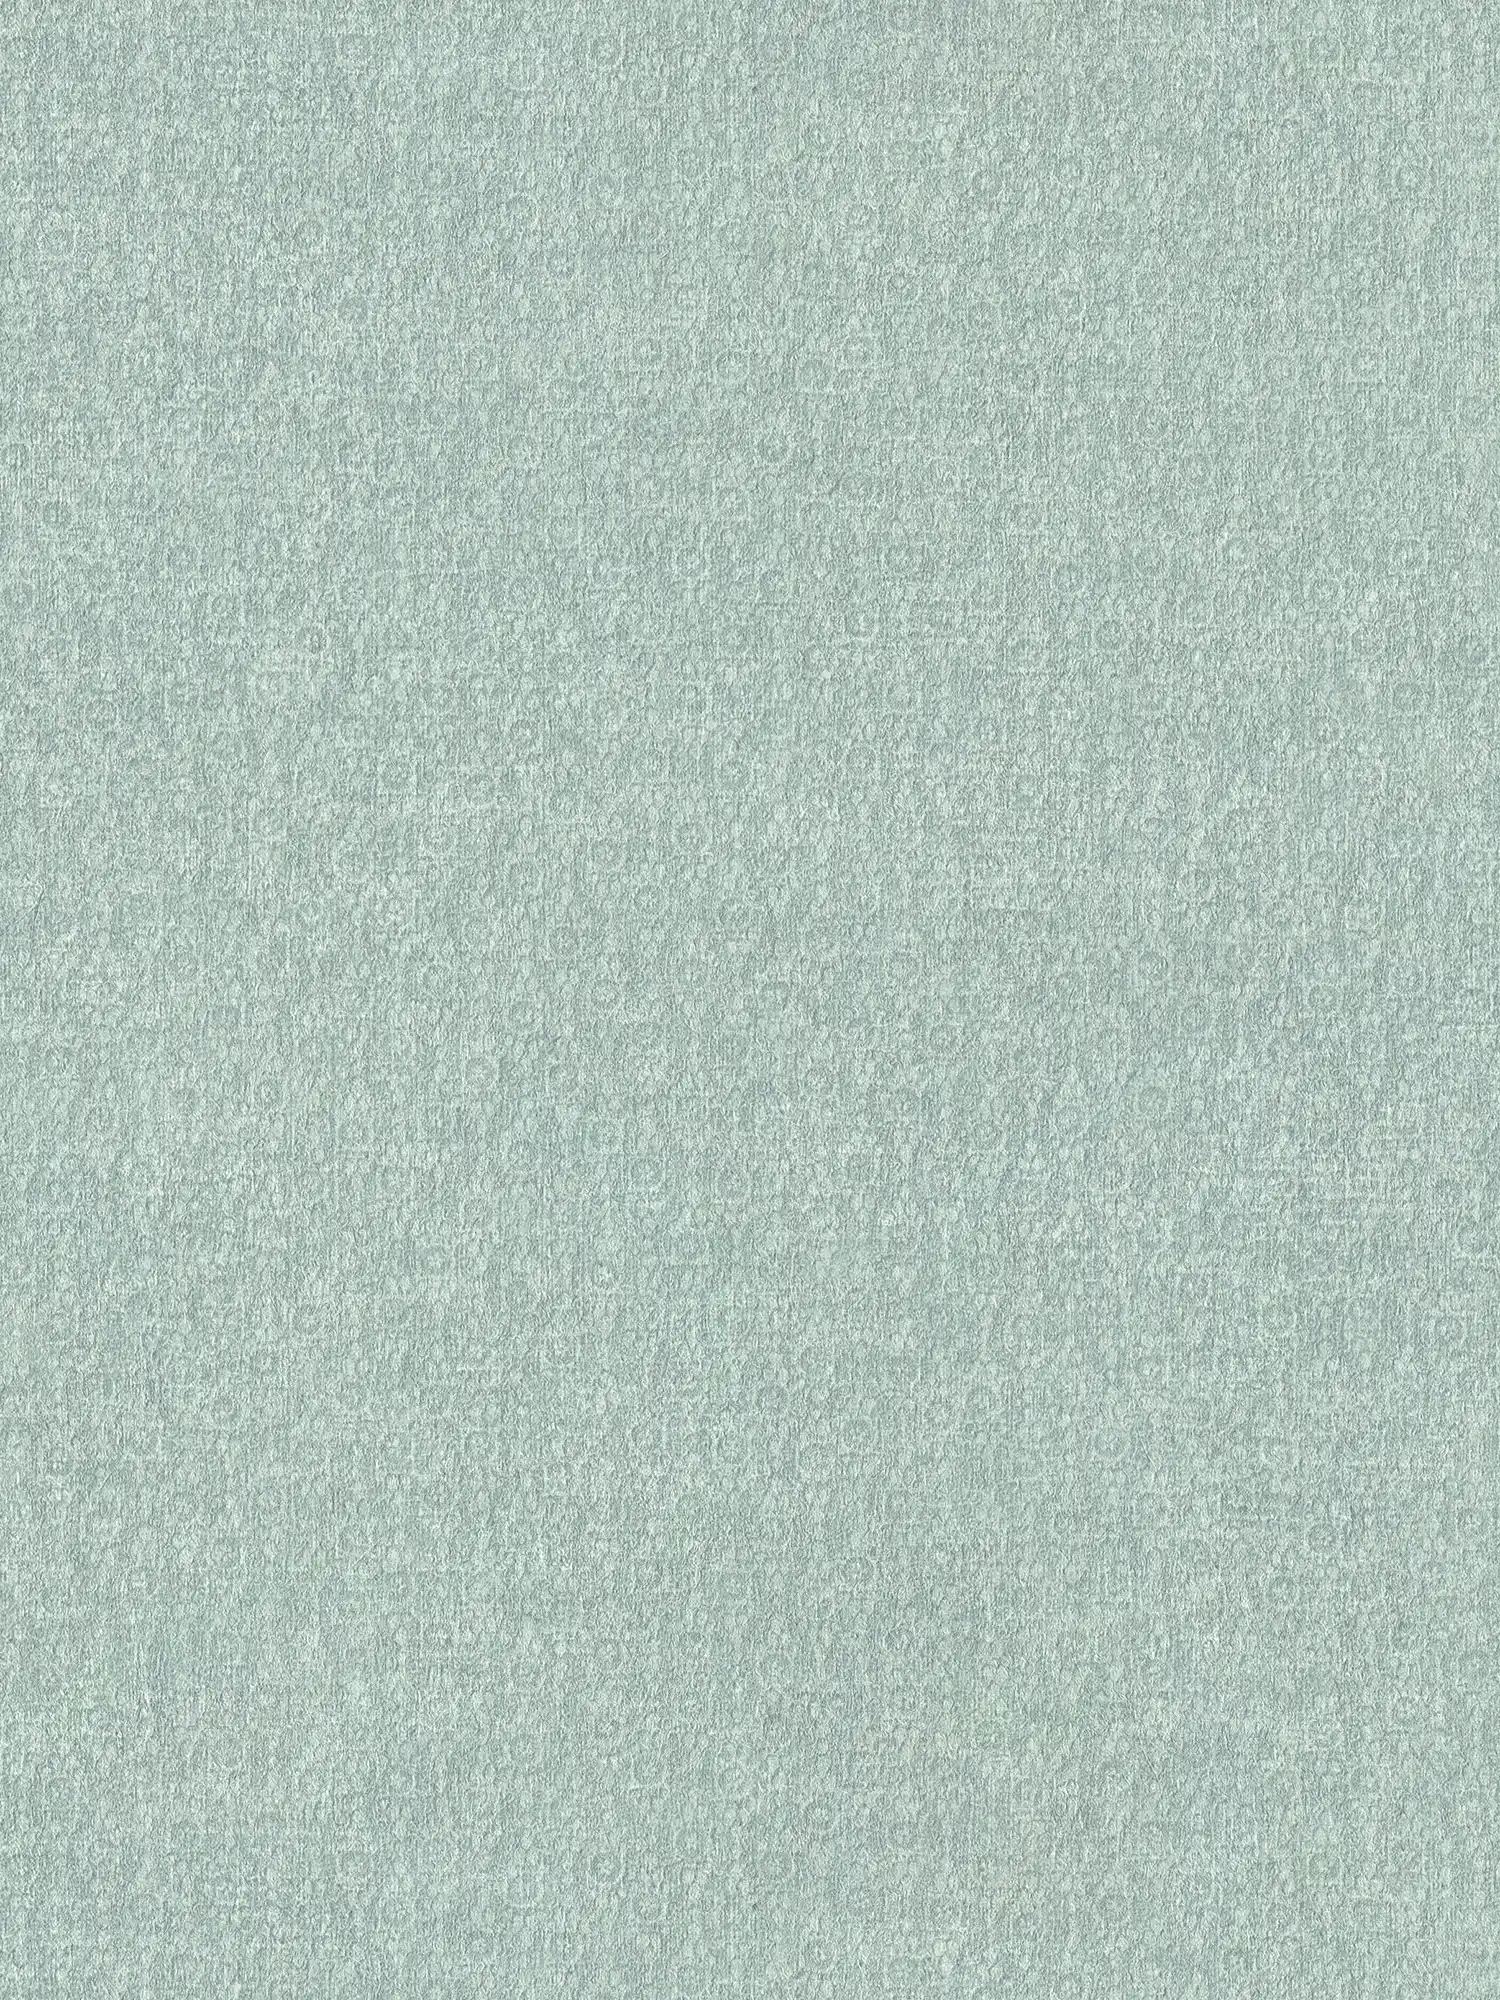 Textured wallpaper mint green with tone on tone pattern
